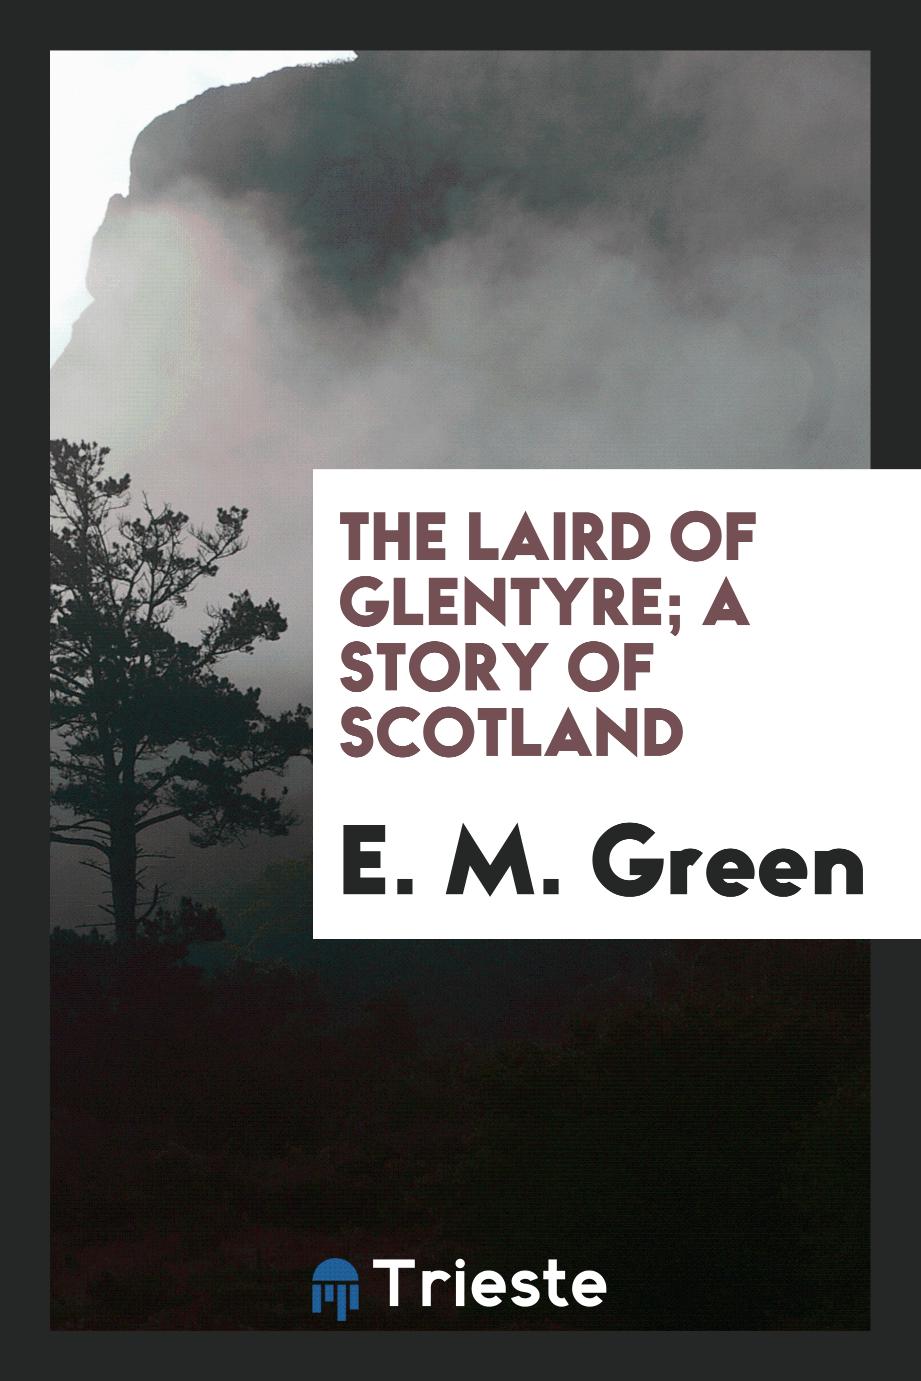 The Laird of Glentyre; a story of scotland